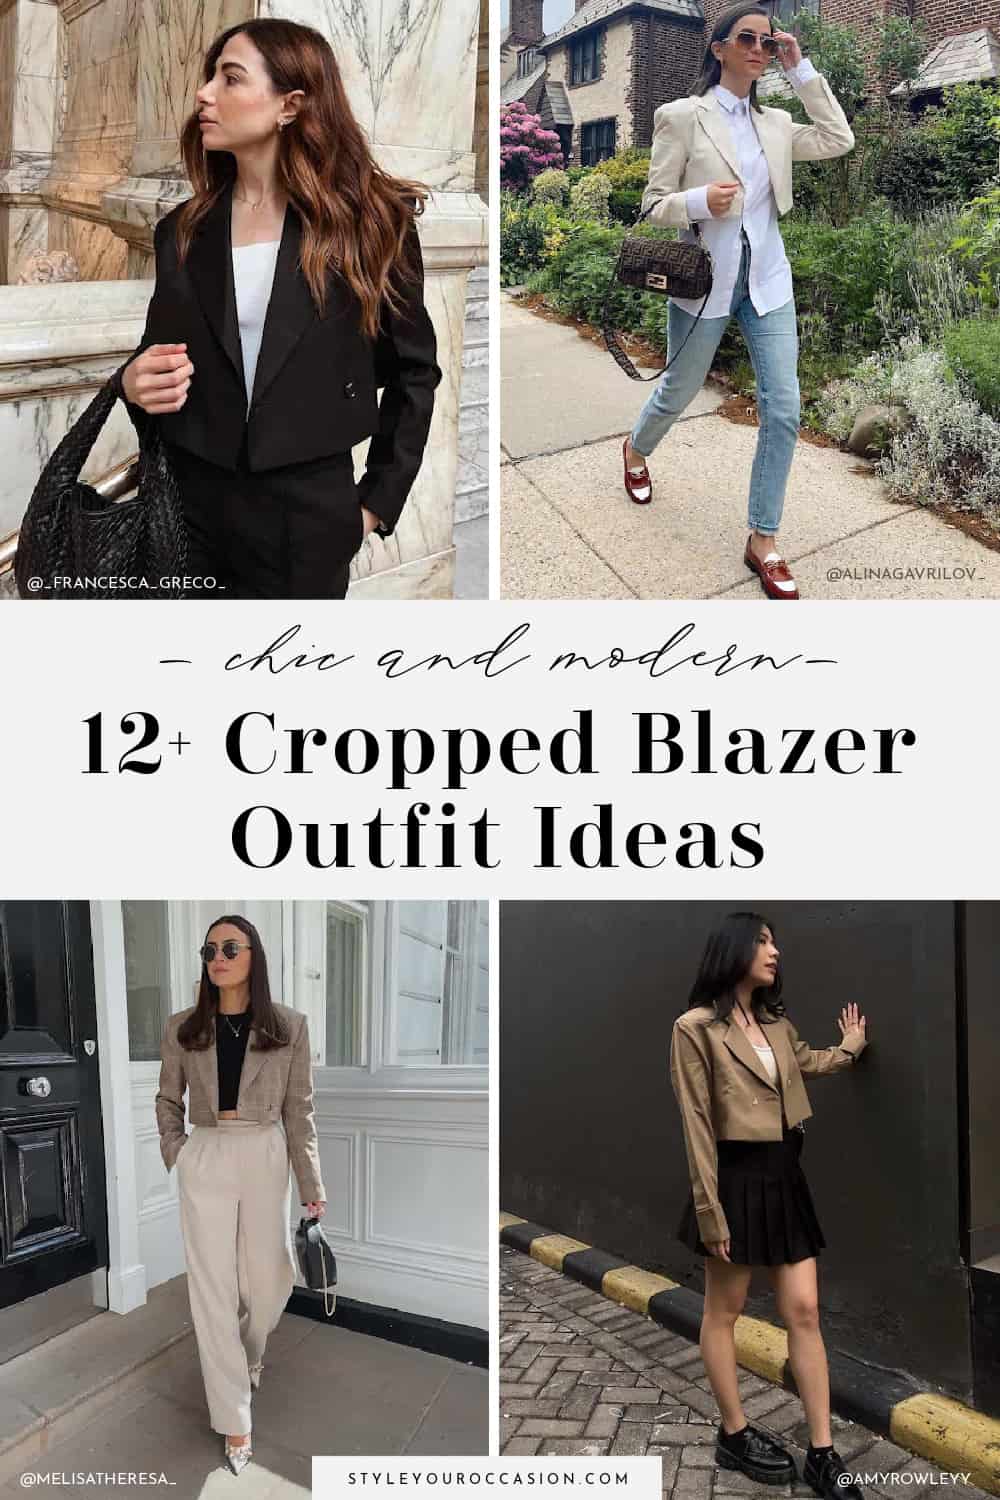 12+ Crop Blazer Outfit Ideas That Prove You Need This Chic Piece!